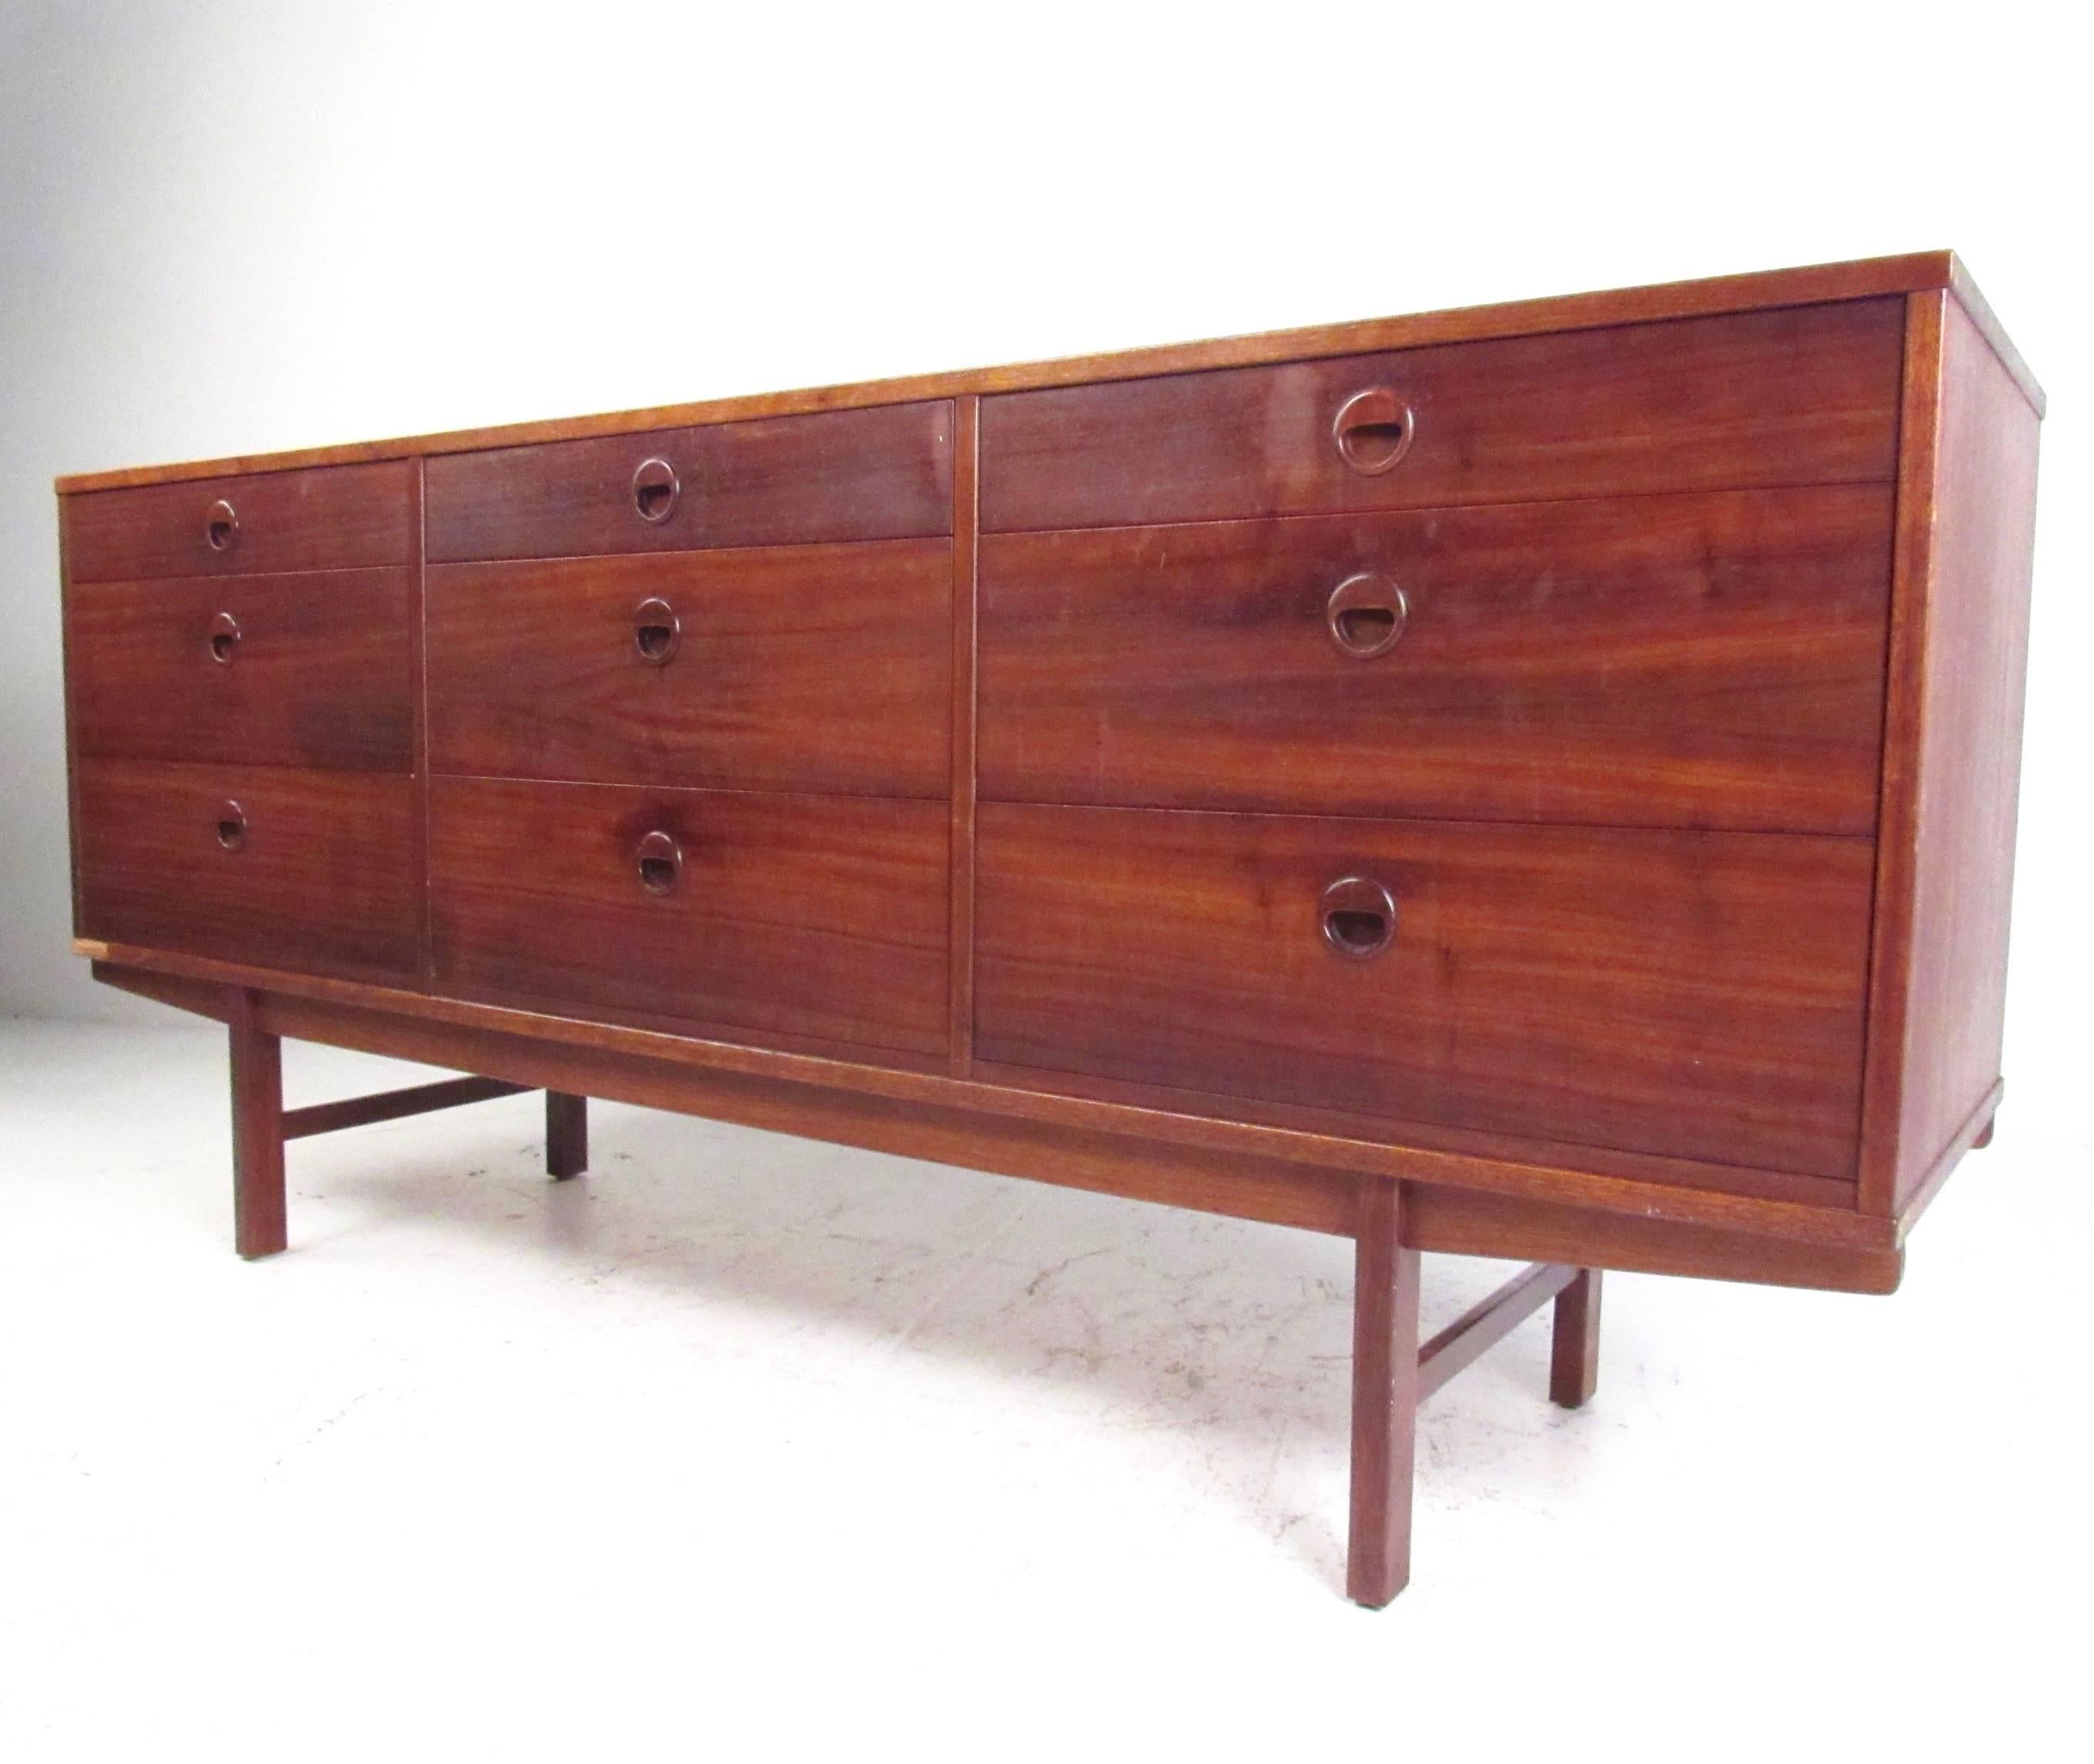 This stylish vintage teak sideboard features nine spacious drawers for storage, including felt lined top drawer for silver storage. Dated from 1960, this Mid-Century Modern piece makes the perfect storage dresser, service sideboard, or media